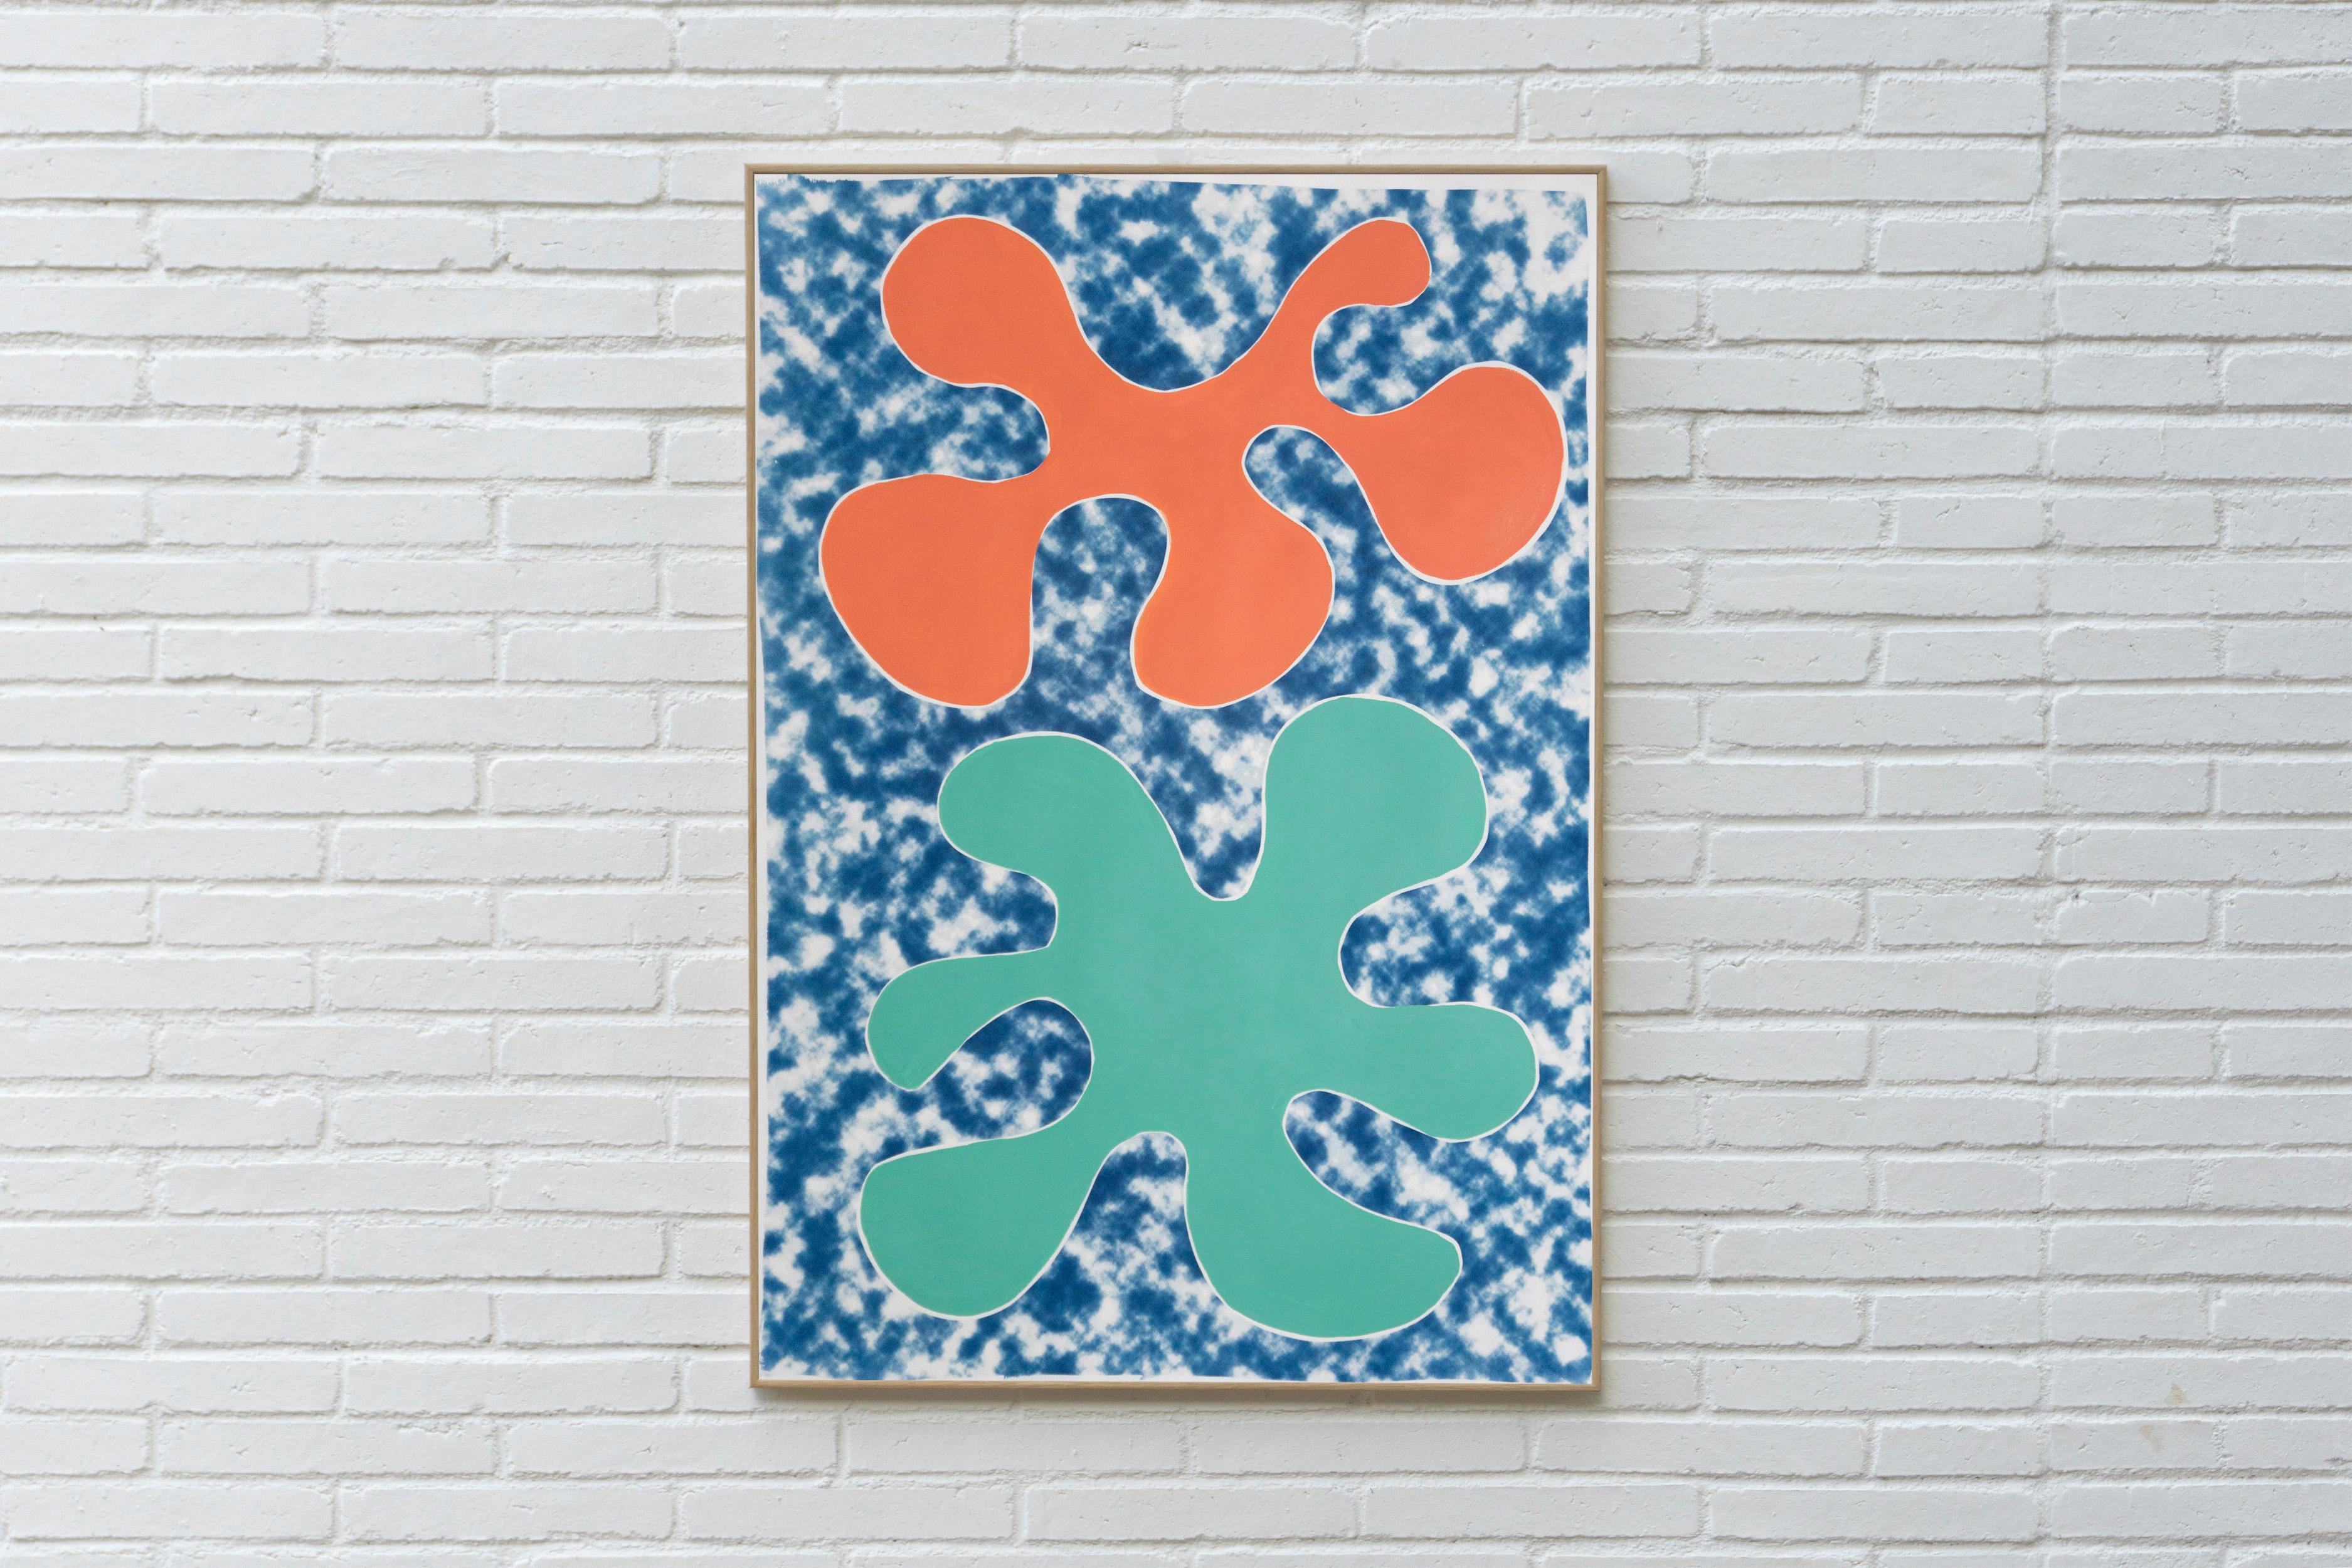 This is a unique mixed media piece: it is a hand-painted botanical abstract colorful shape upon a background that is a cyanotype print of a cloudy texture, giving it a modern, abstract geometric feel that will look great in contemporary and classic